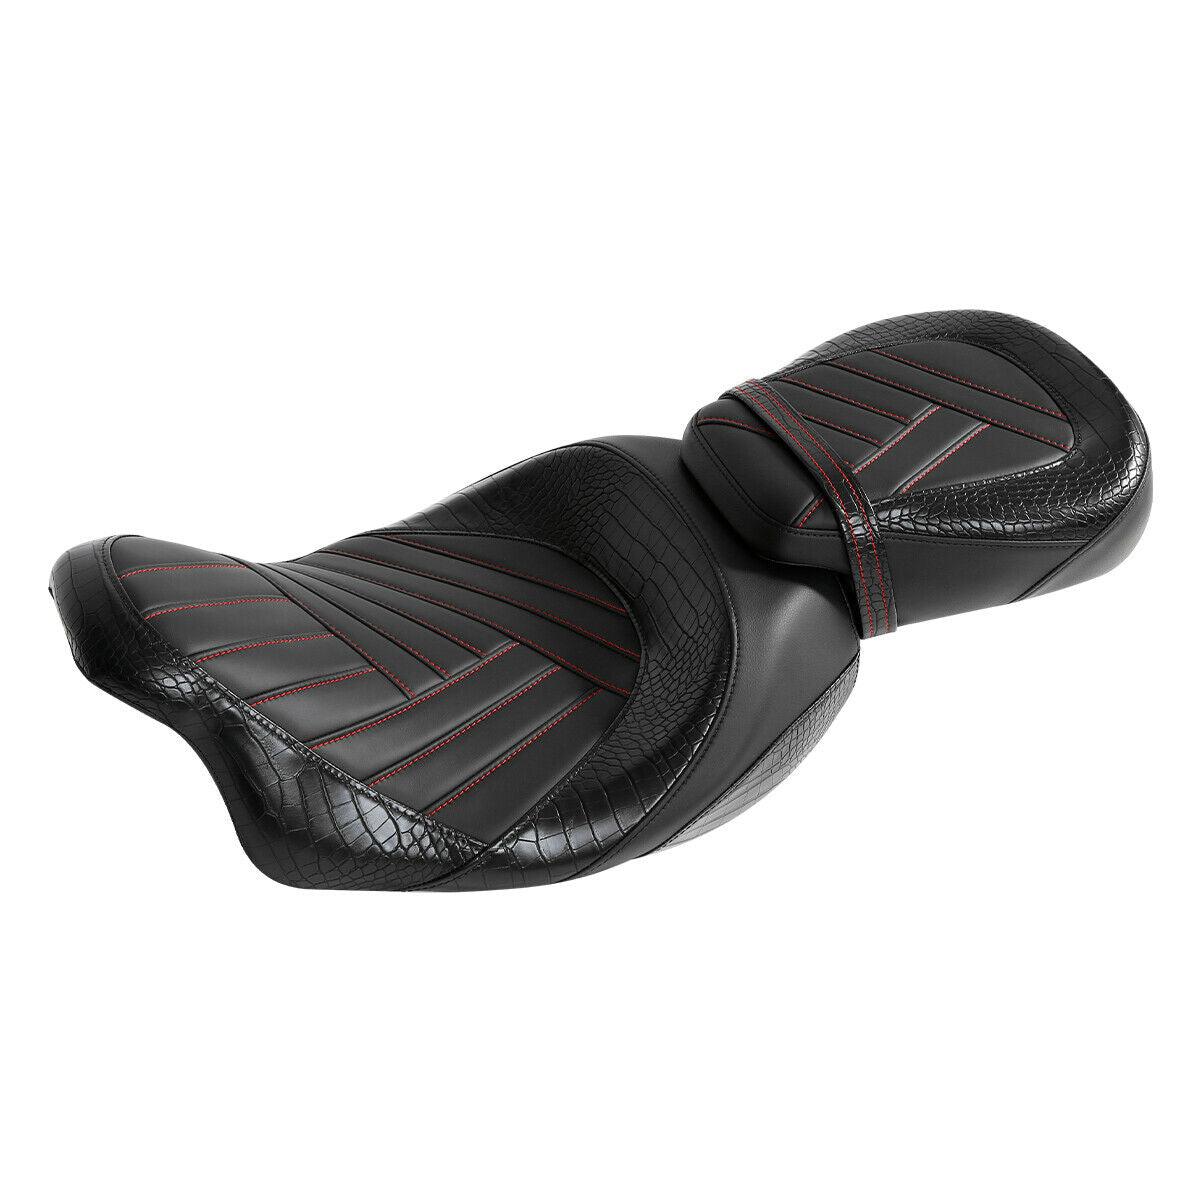 Driver Passenger Seat Fit For Harley Touring Road King Street Glide 2009-2022 20 - Moto Life Products